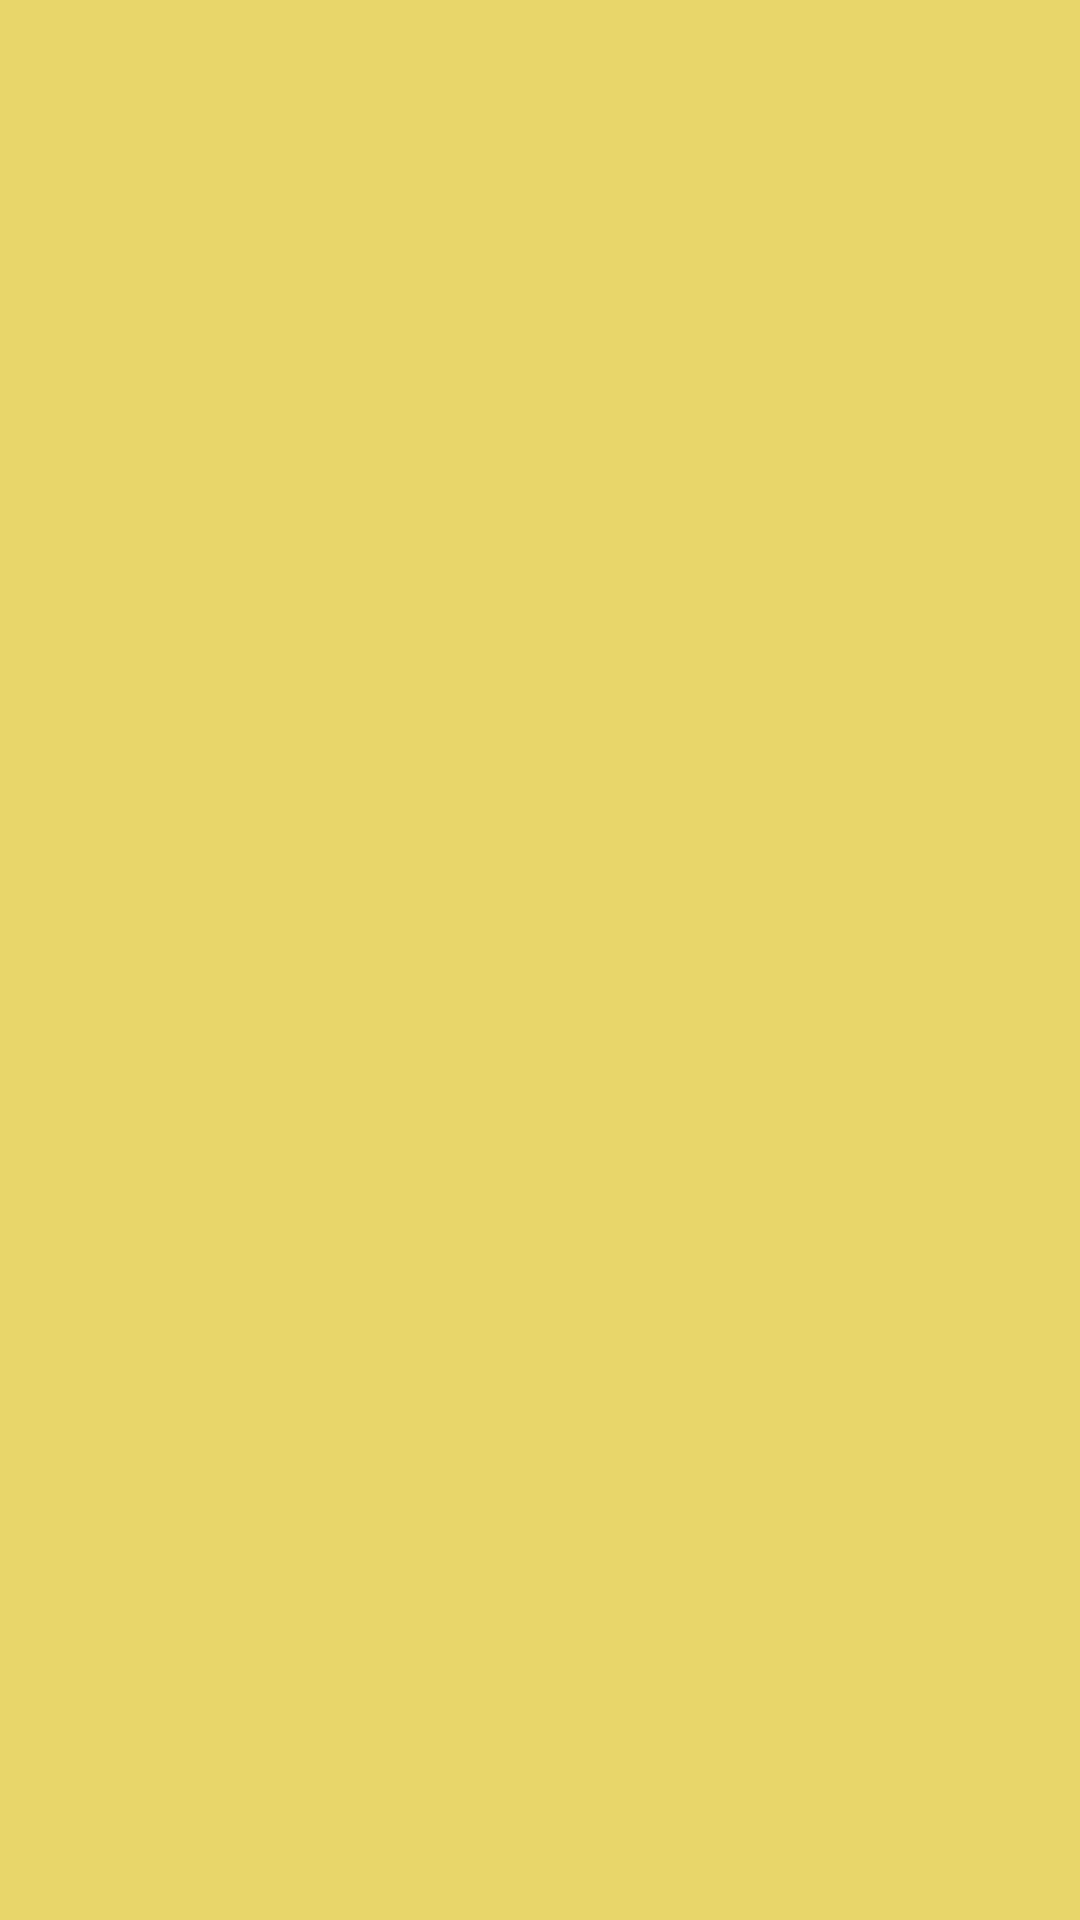 1080x1920 Hansa Yellow Solid Color Background